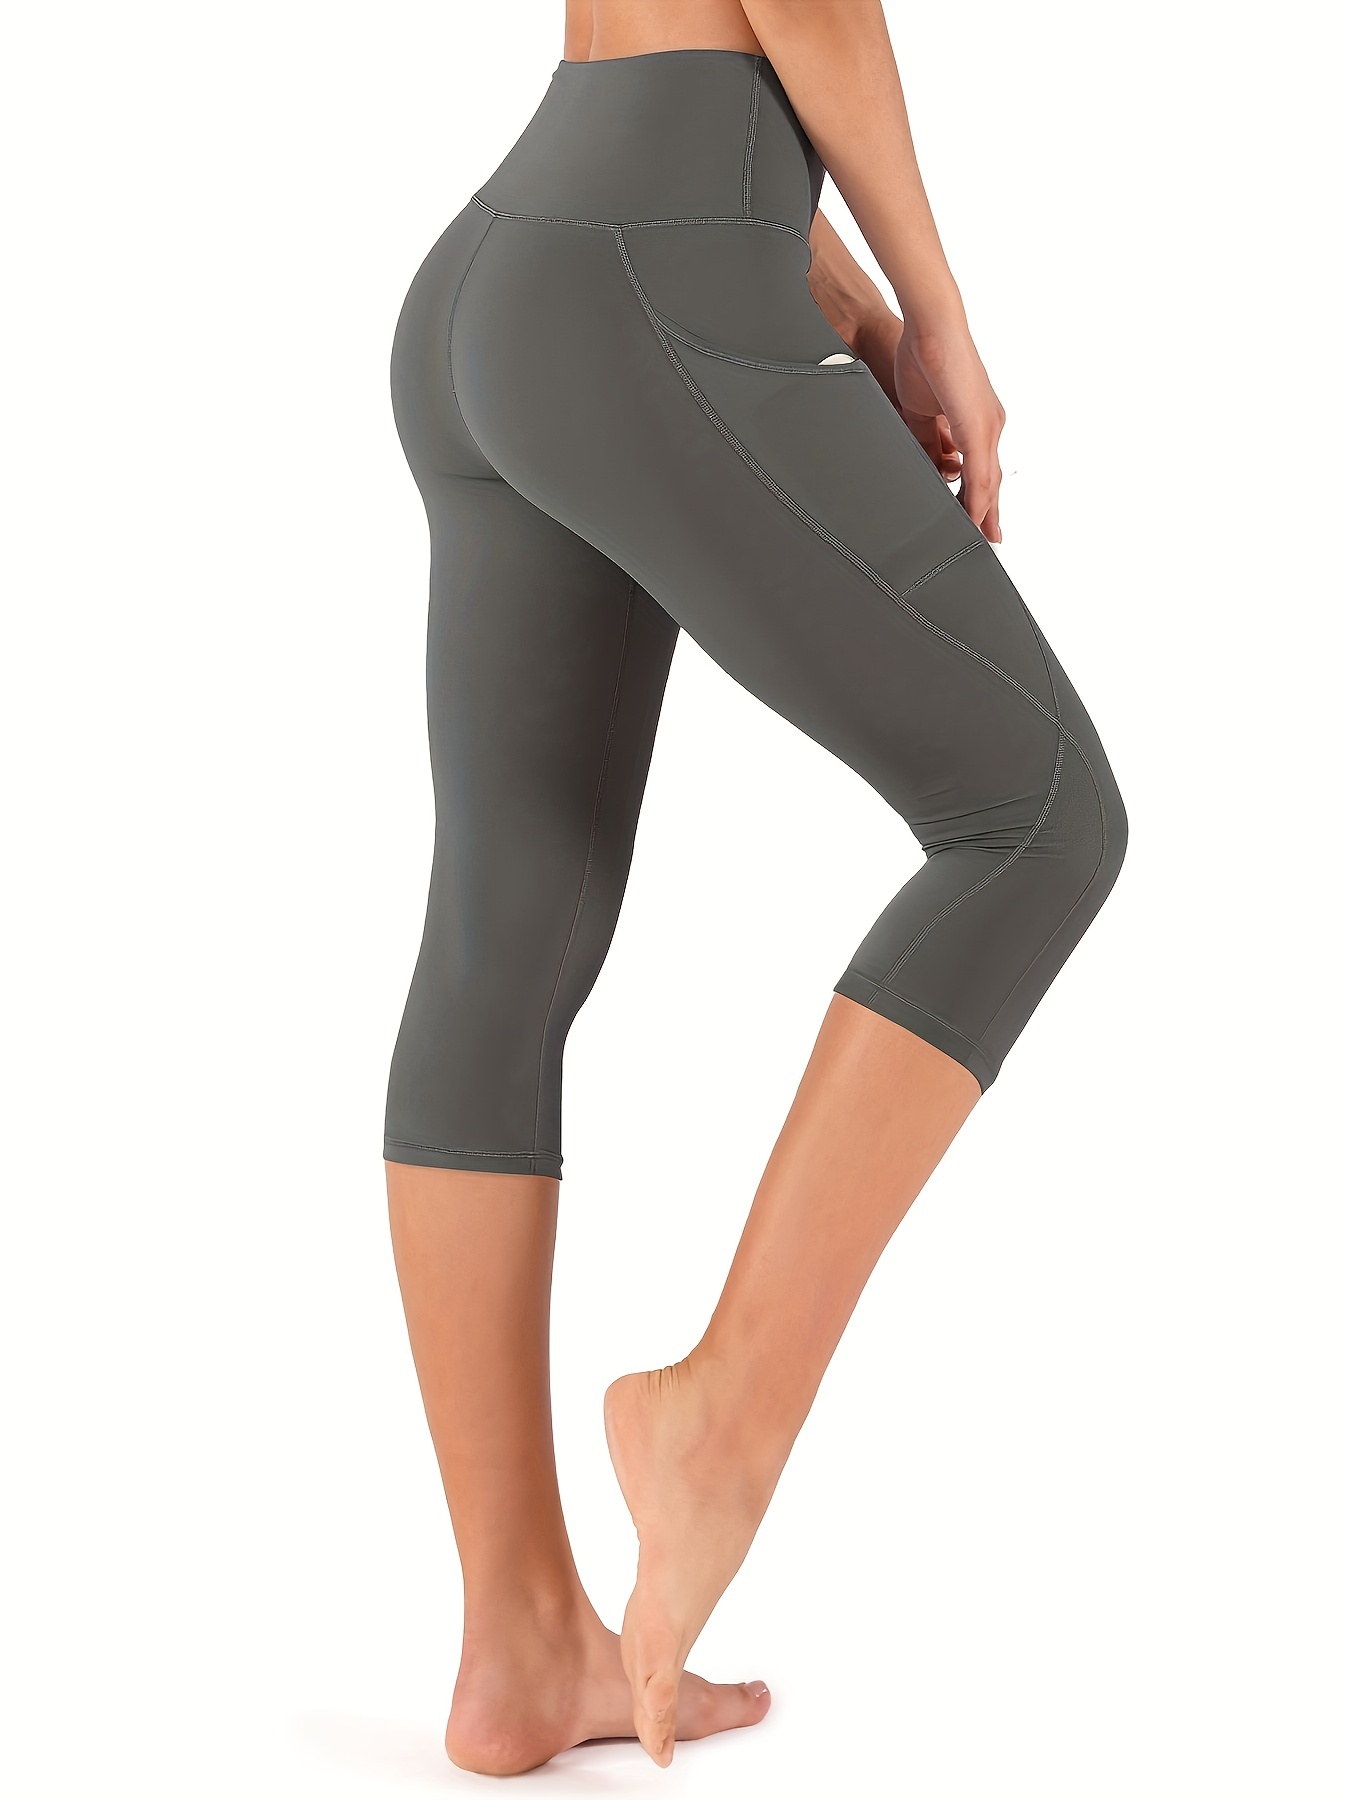 Workout Capri Leggings with Pocket For Women High Waisted Athletic Yoga  Pants